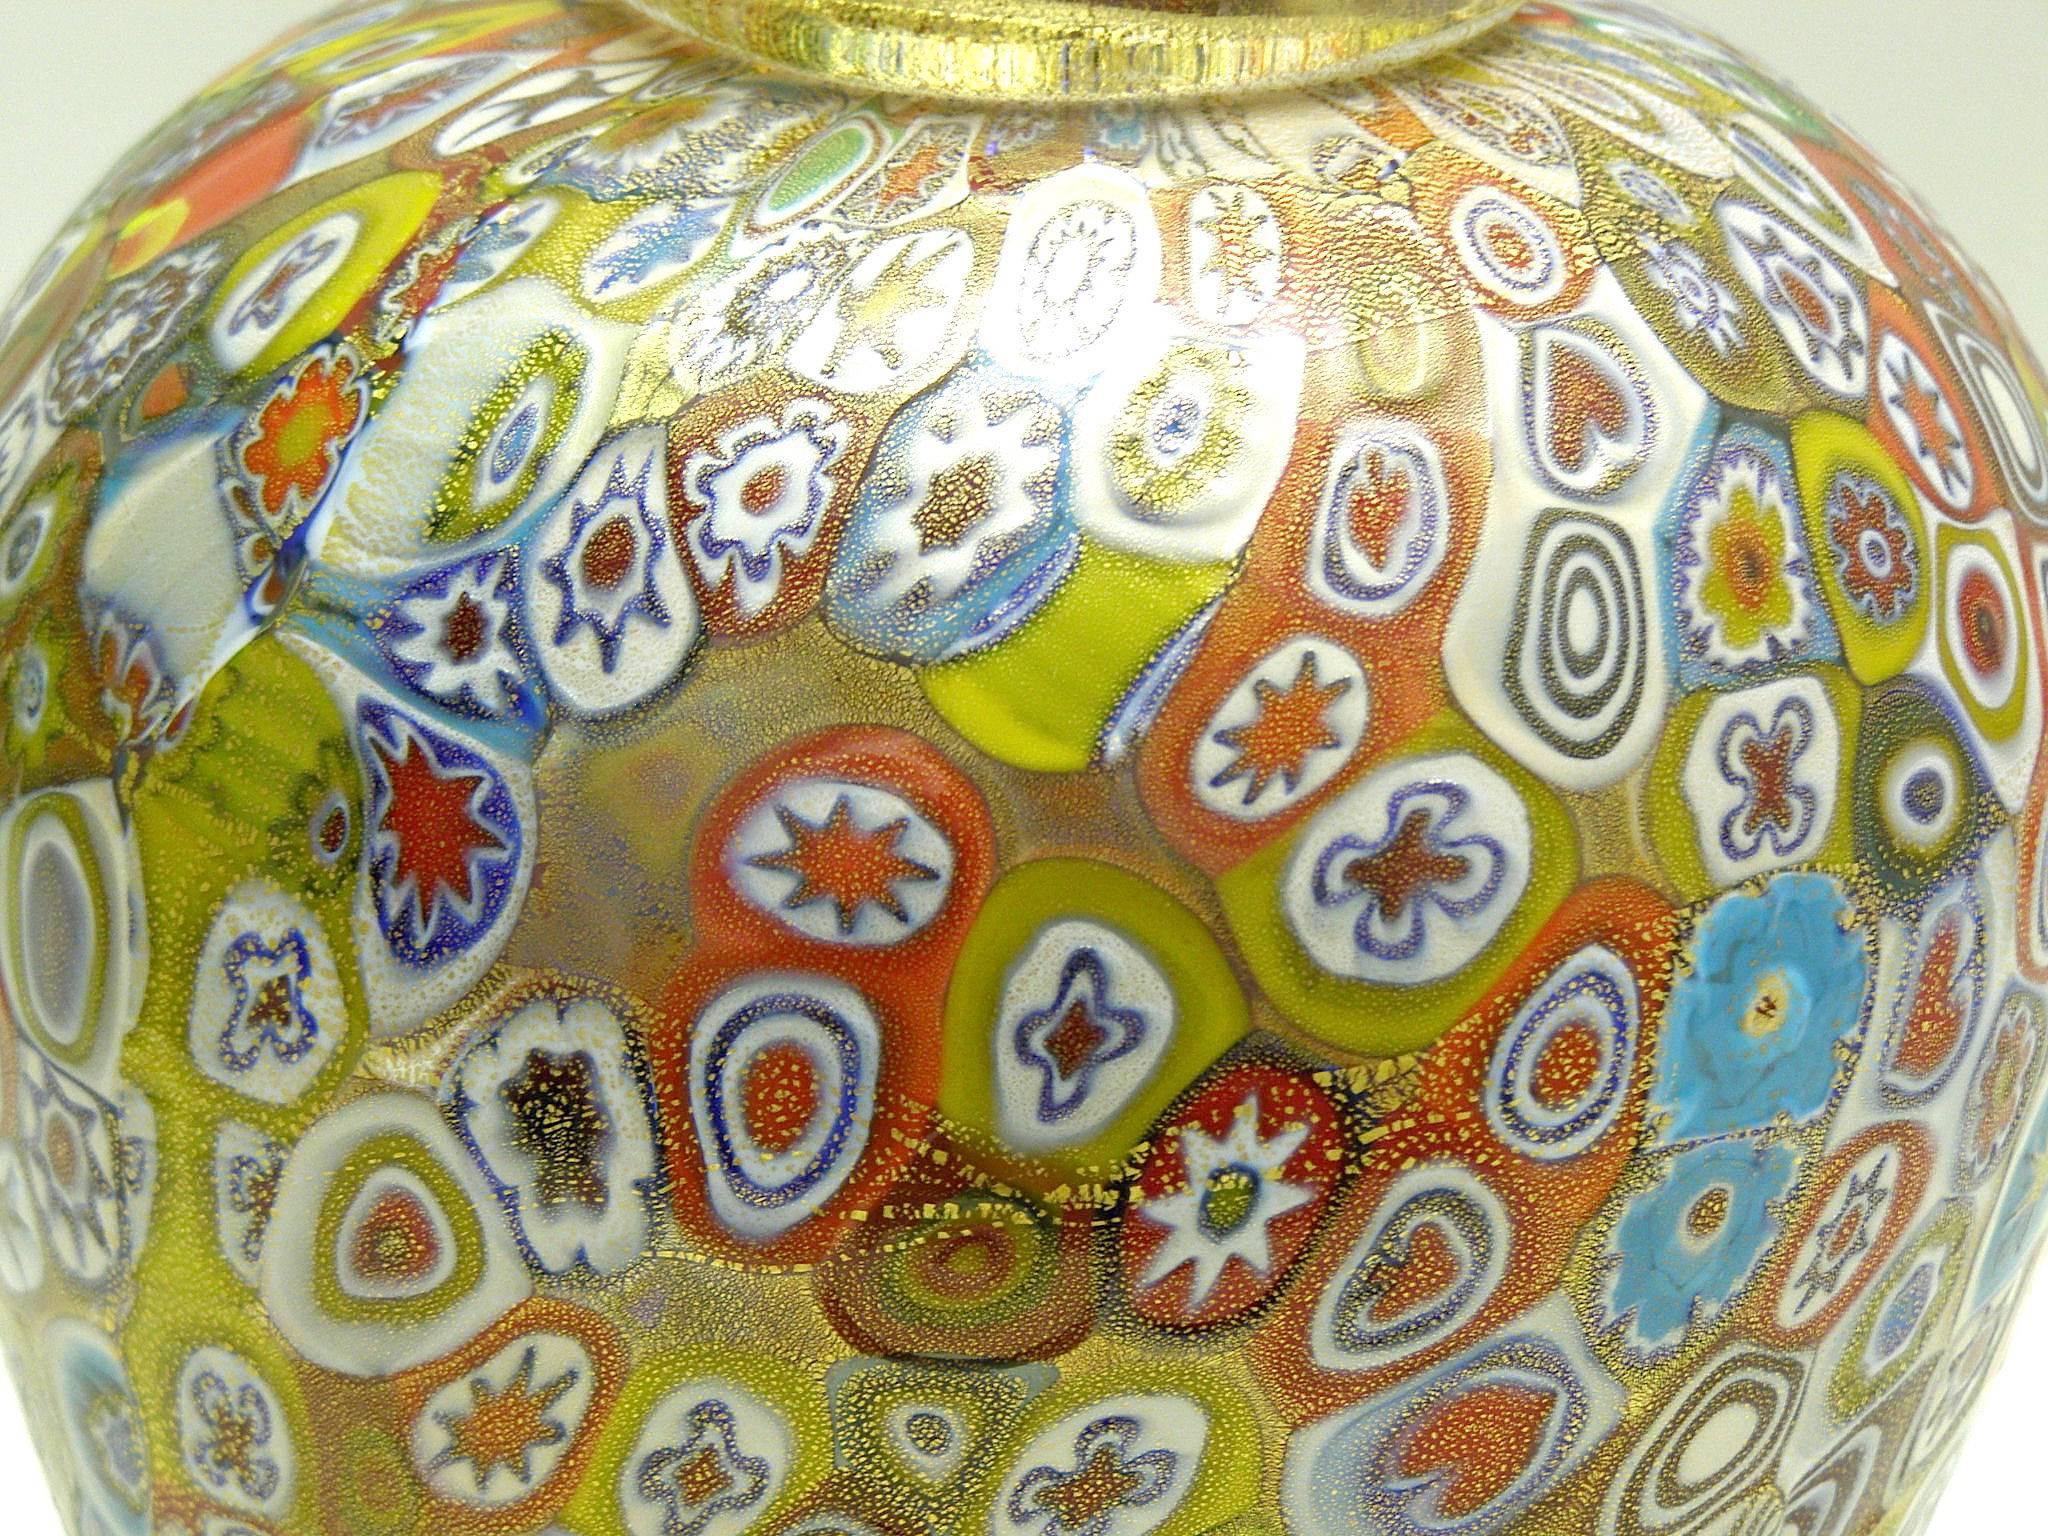 Gorgeous handblown Murano glass urn vase by Gambaro & Poggi with raised millefiori design and a fused rim filled with gold leaf flecking.